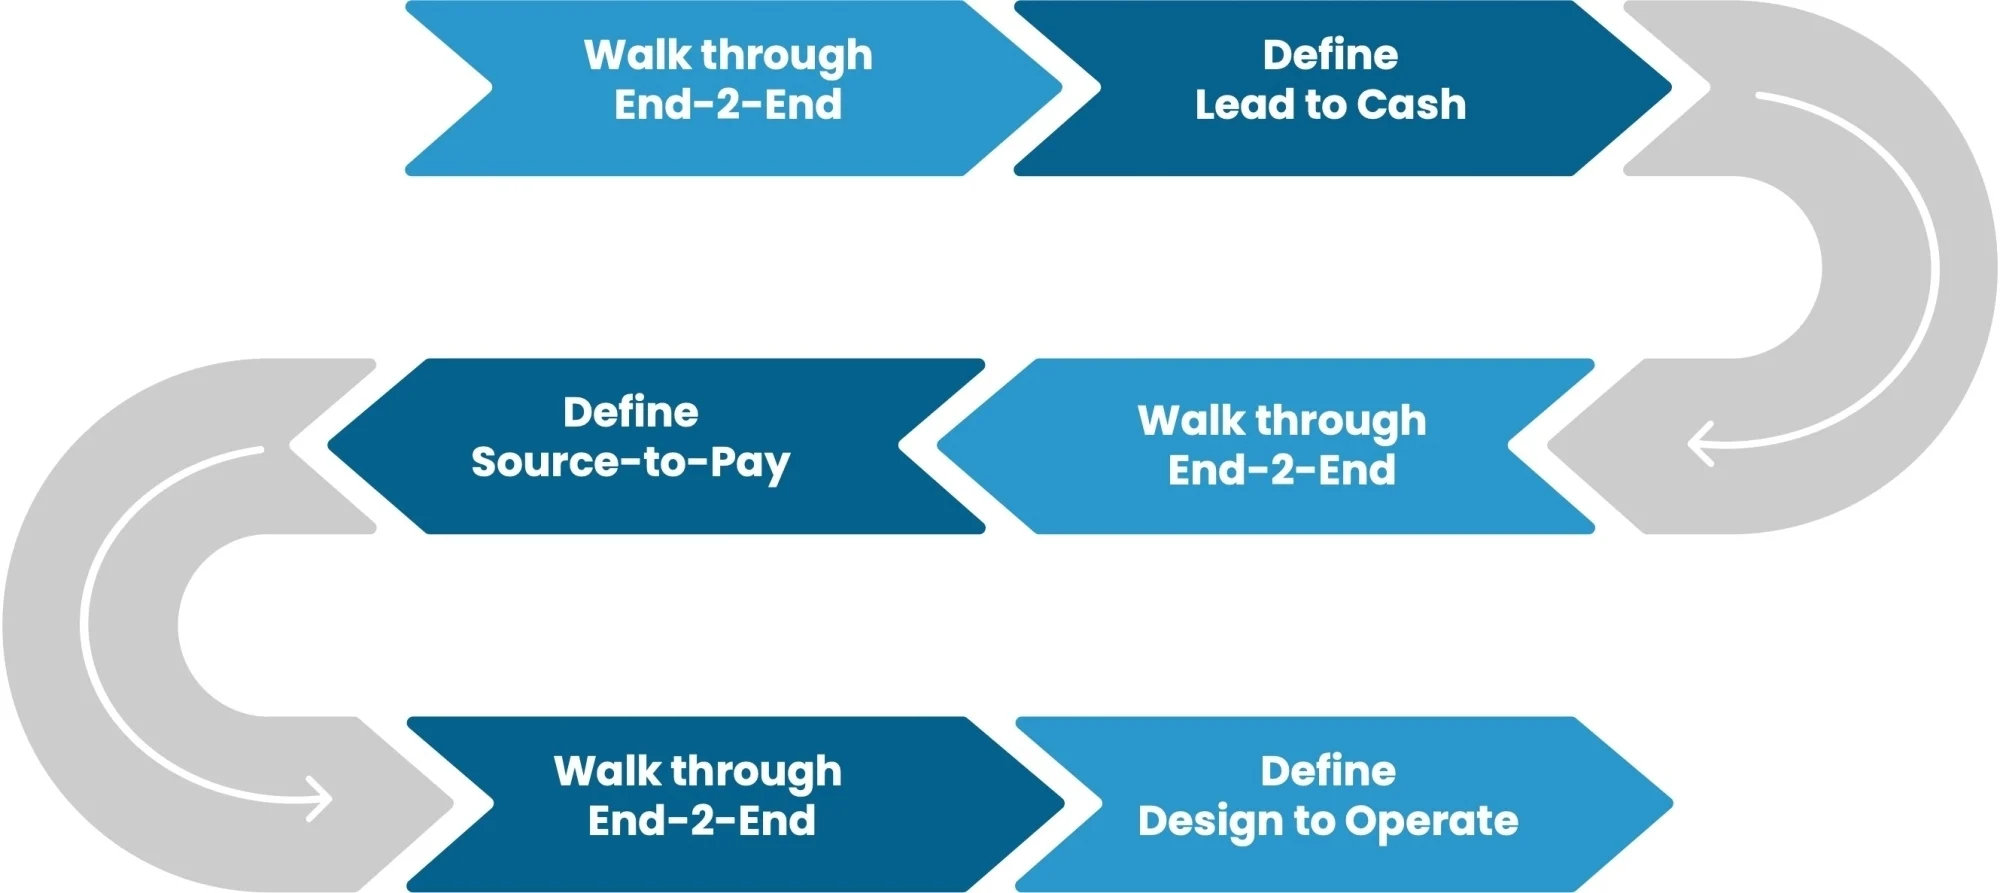 Scheer's Fits-to-Standard approach for end-to-end business process